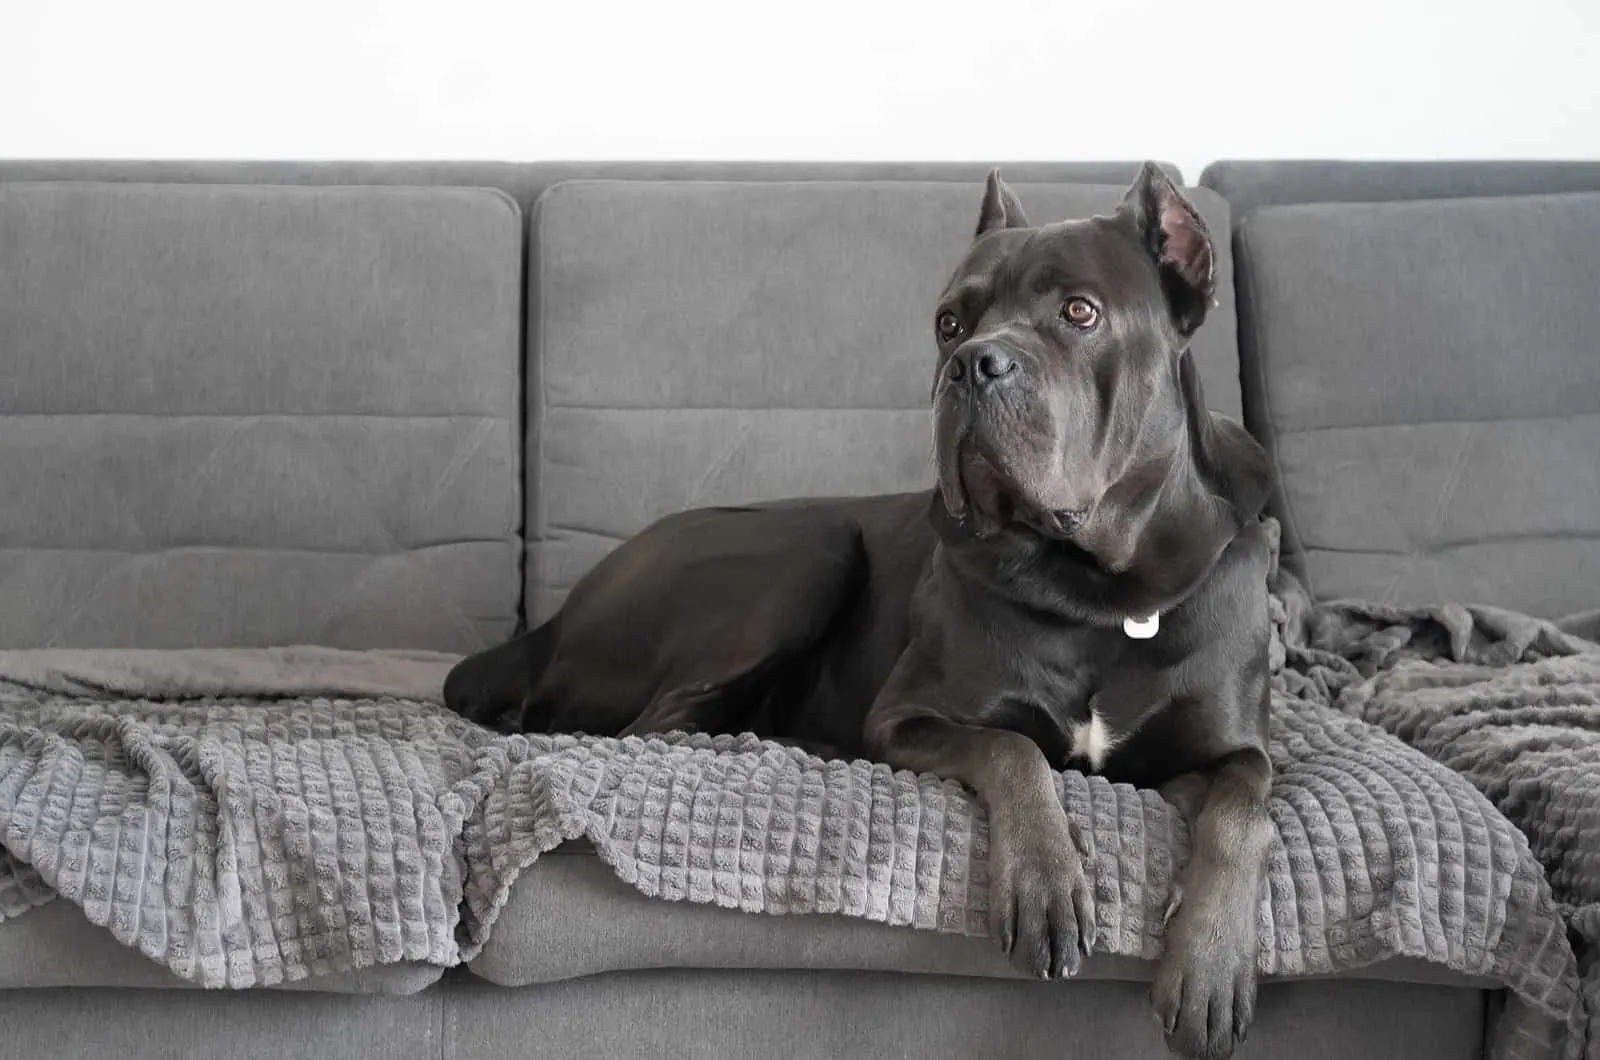 cane corso lying on couch